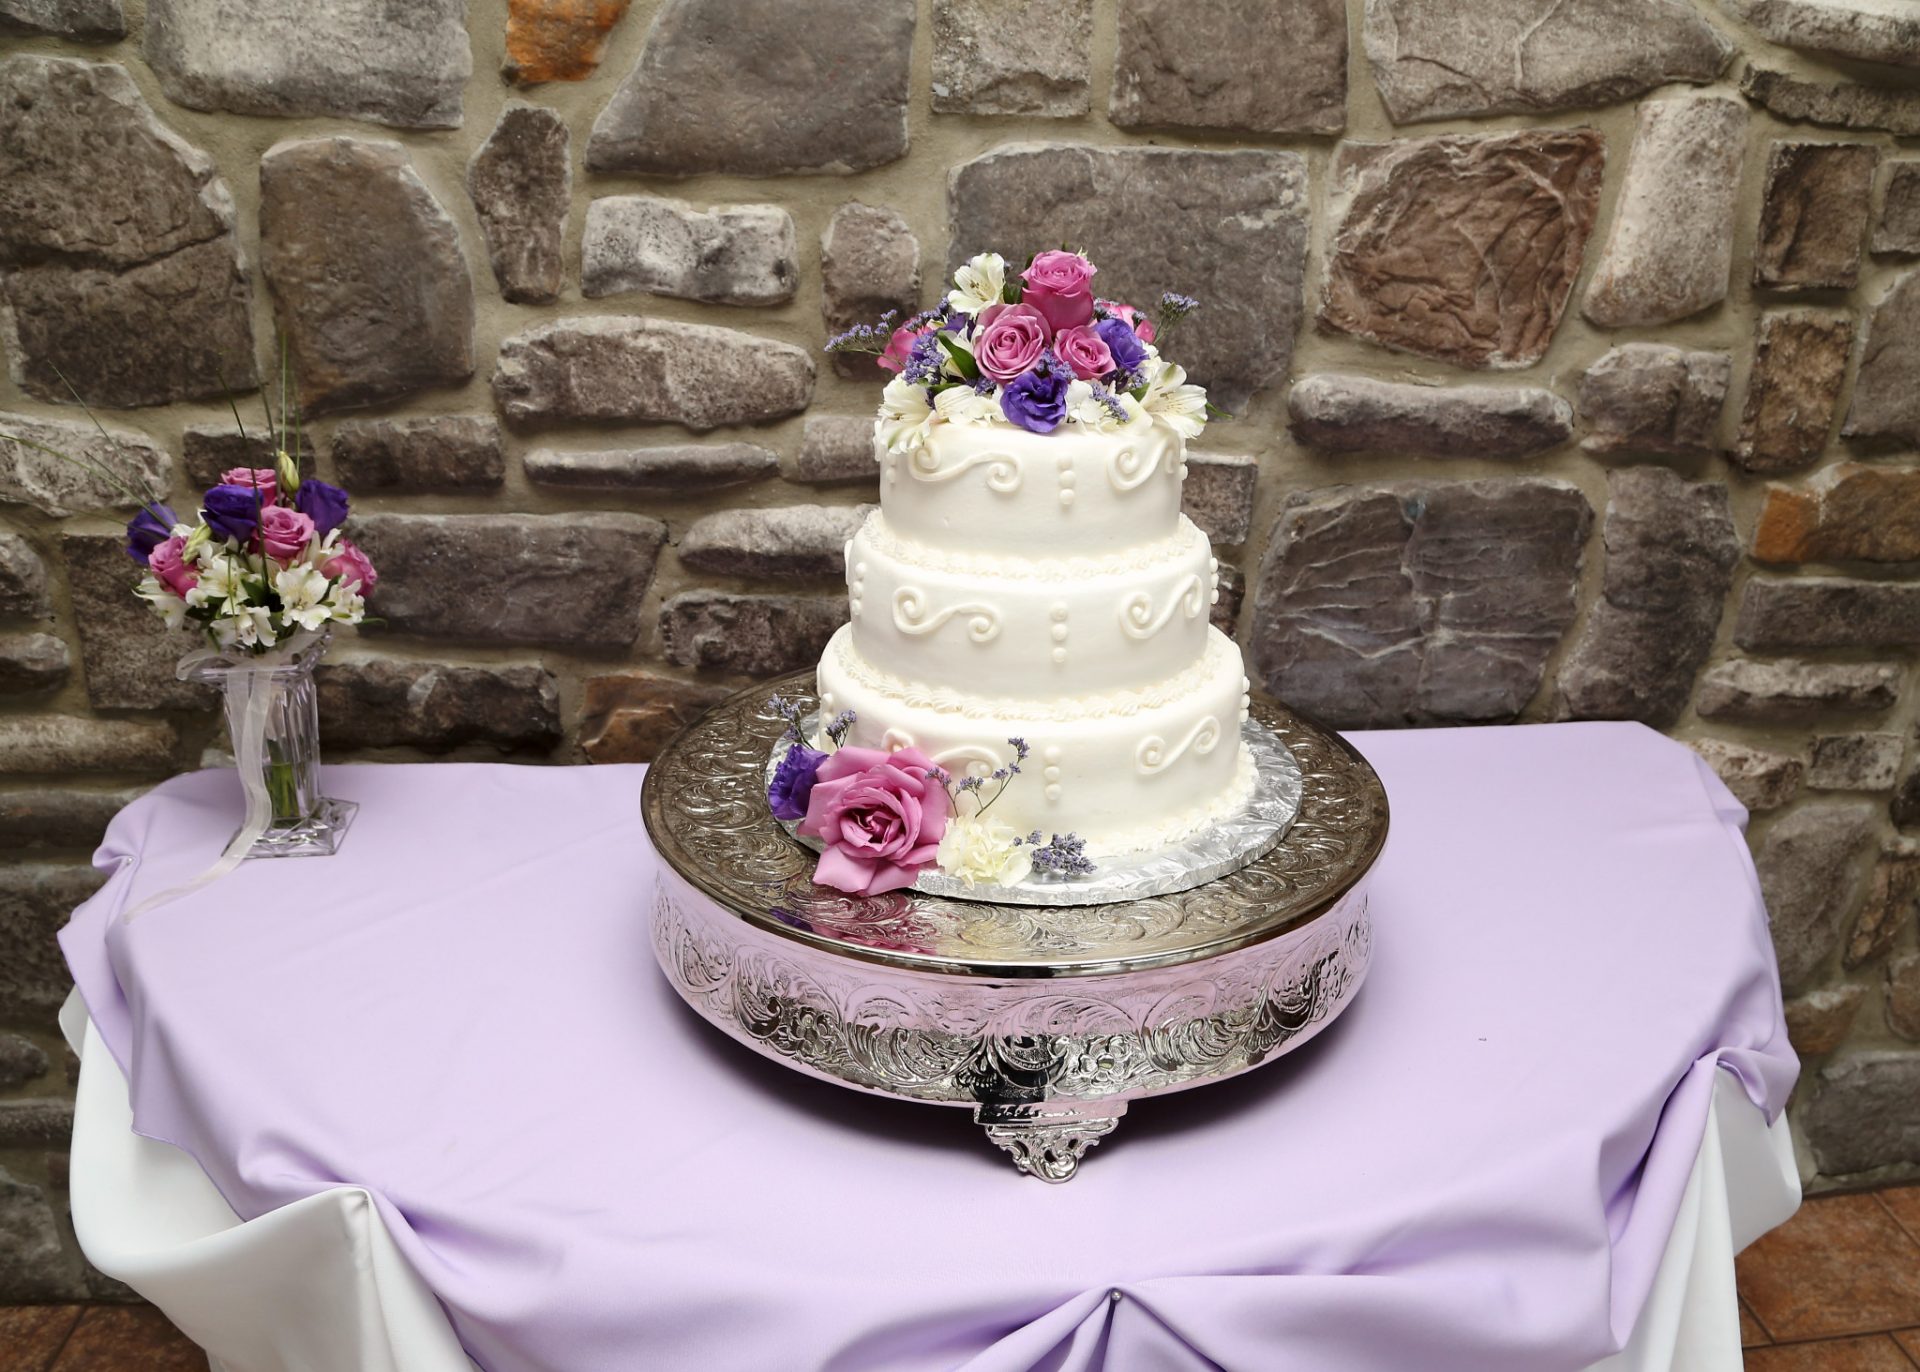 Three tiered wedding cake with white cream icing and decorated with pink and purple flowers. The cake sits on a silver cake display stand.